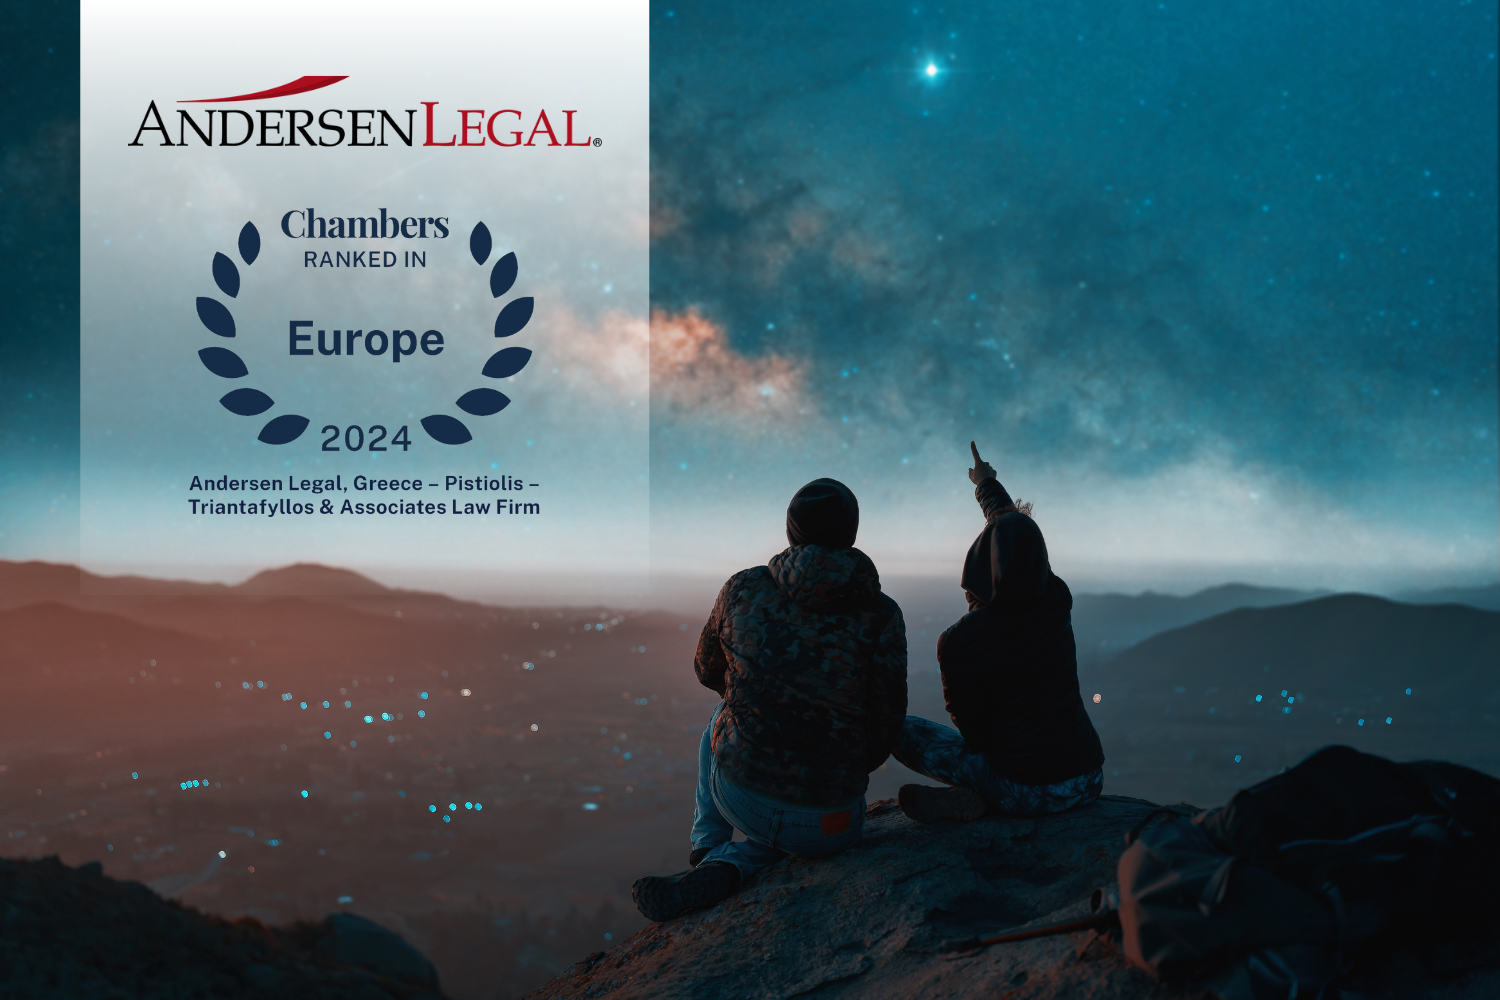 Andersen Legal Ranked in Chambers & Partners Europe 2024 edition